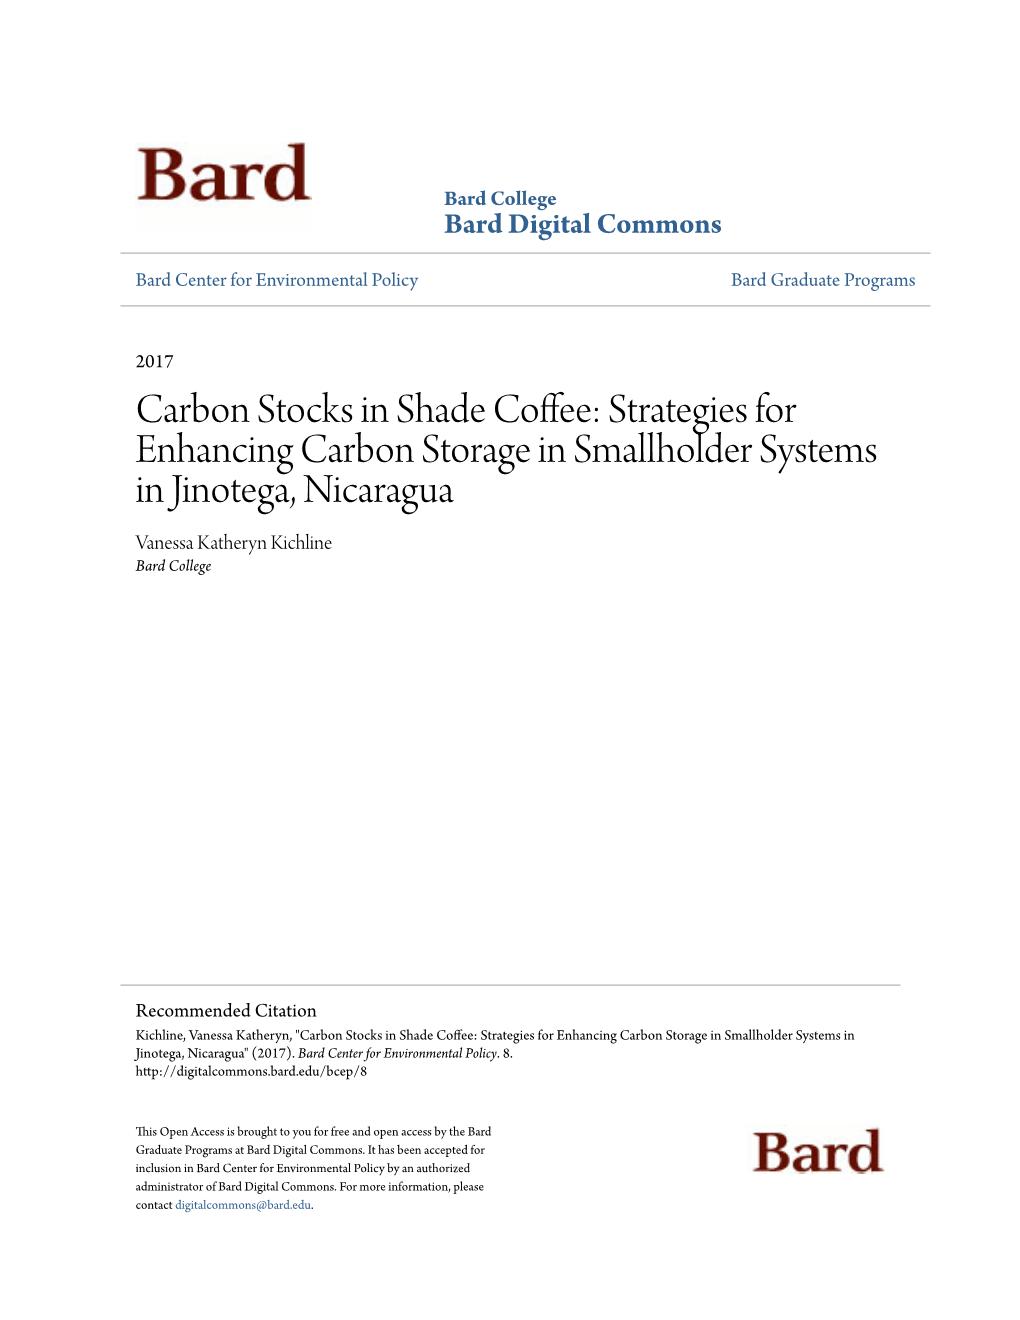 Strategies for Enhancing Carbon Storage in Smallholder Systems in Jinotega, Nicaragua" (2017)